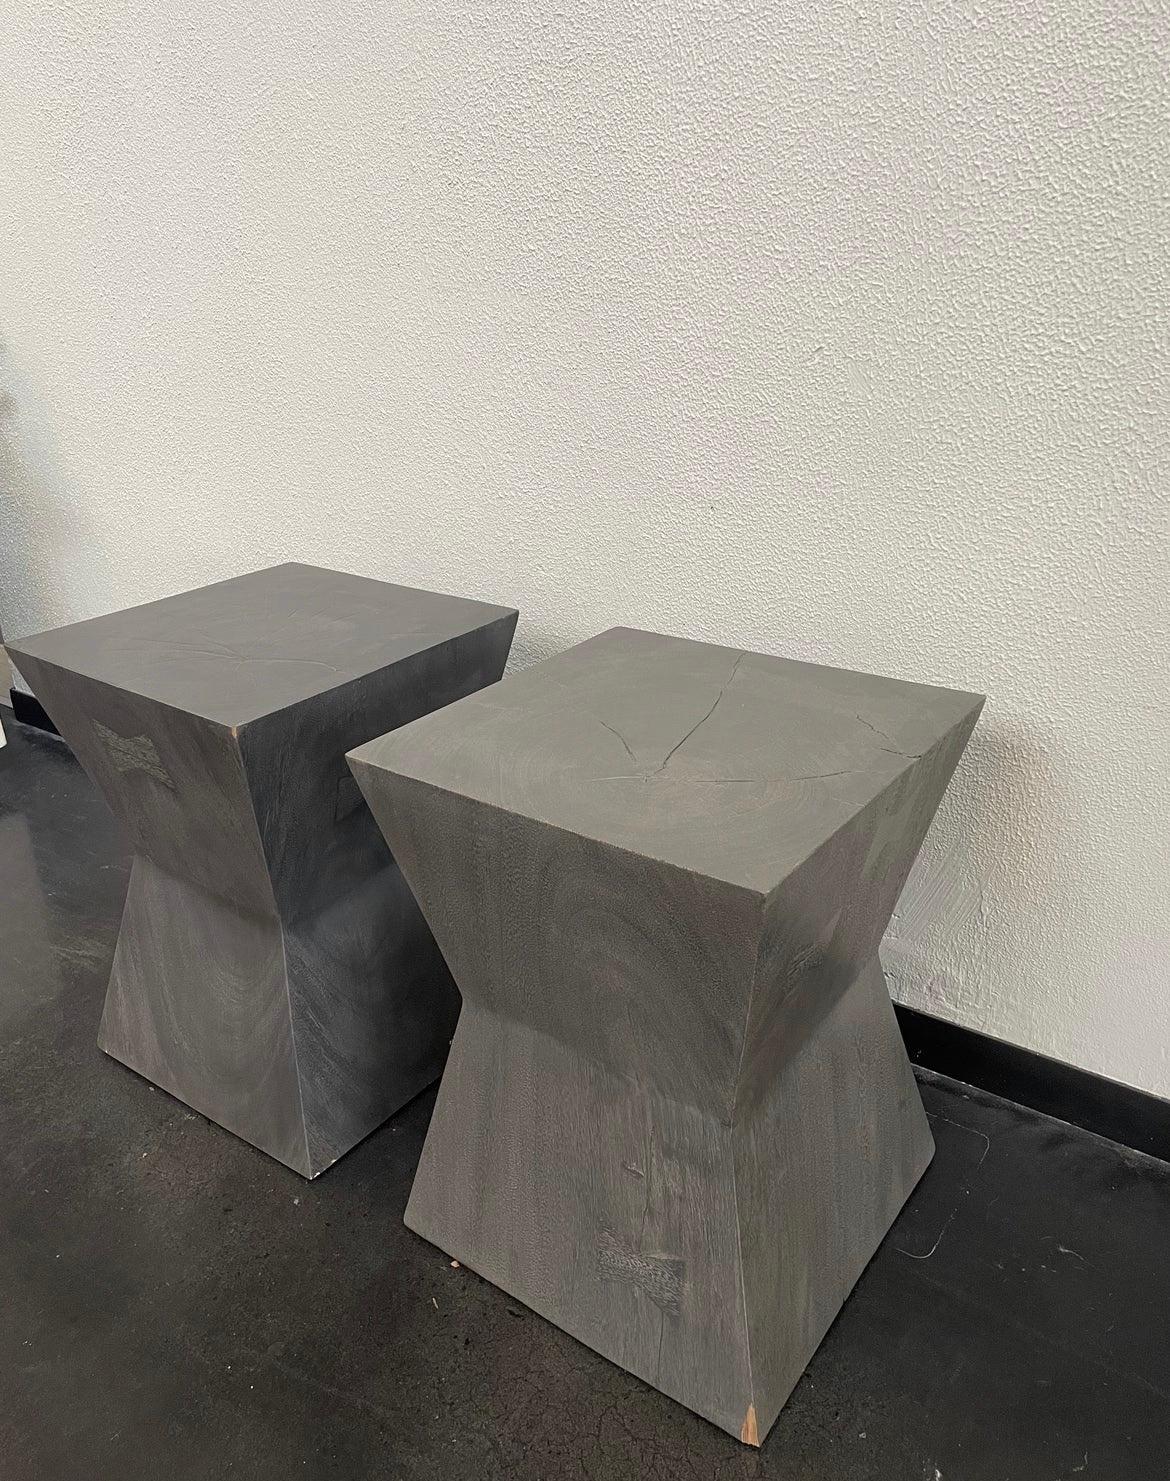 Post modern solid wood side table/stool. Rich charcoal color, a pair. Believed to be from Restoration Hardware but cannot confirm.